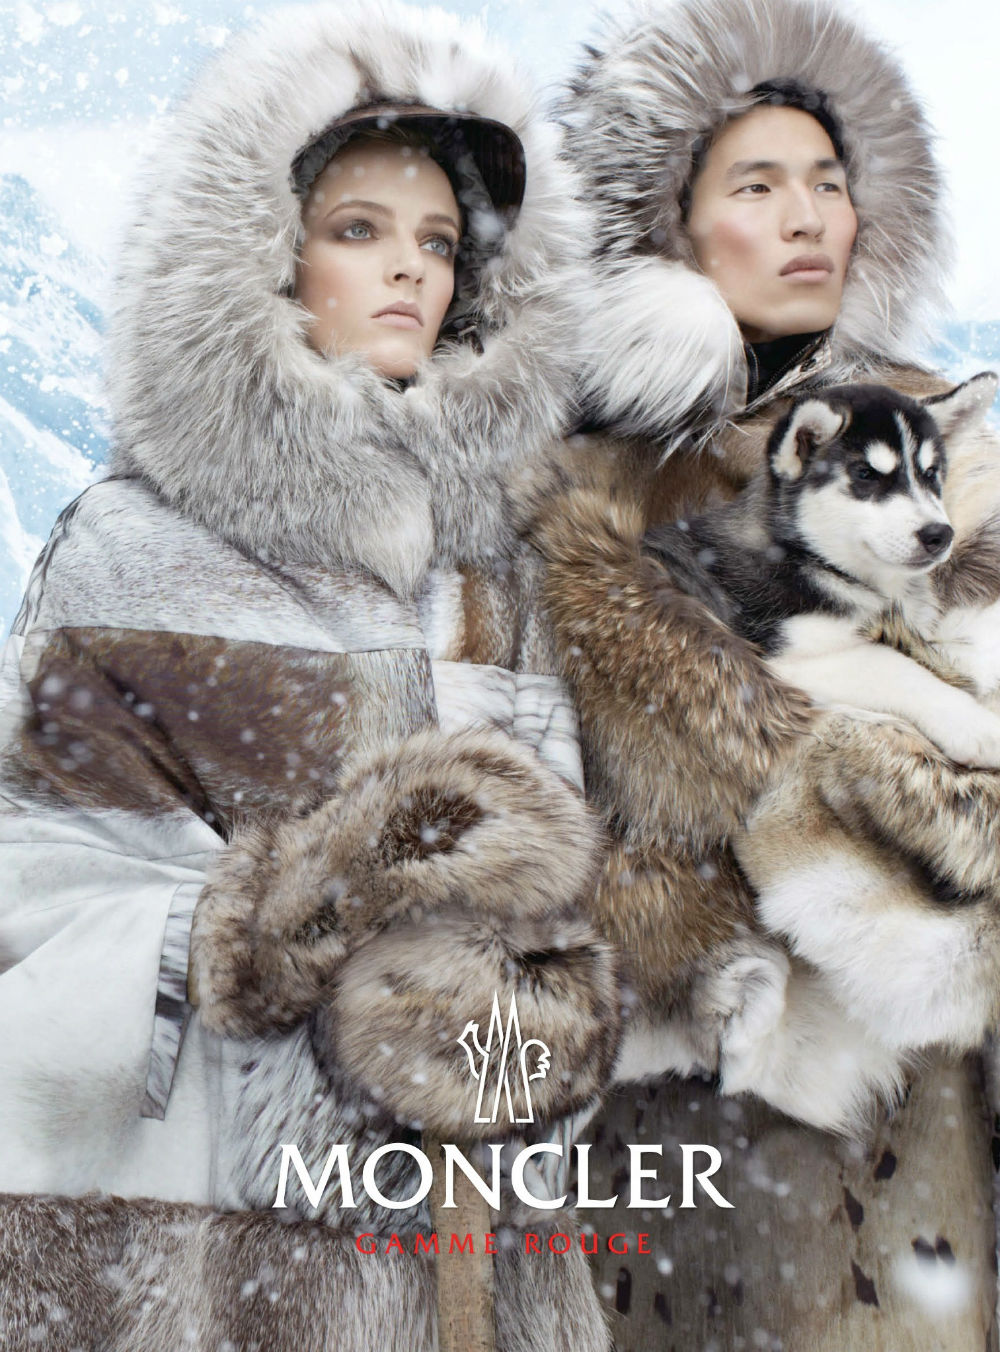 Moncler Gamme Rouge - Fall 2013-Winter 2014 photographed by Steven Meisel